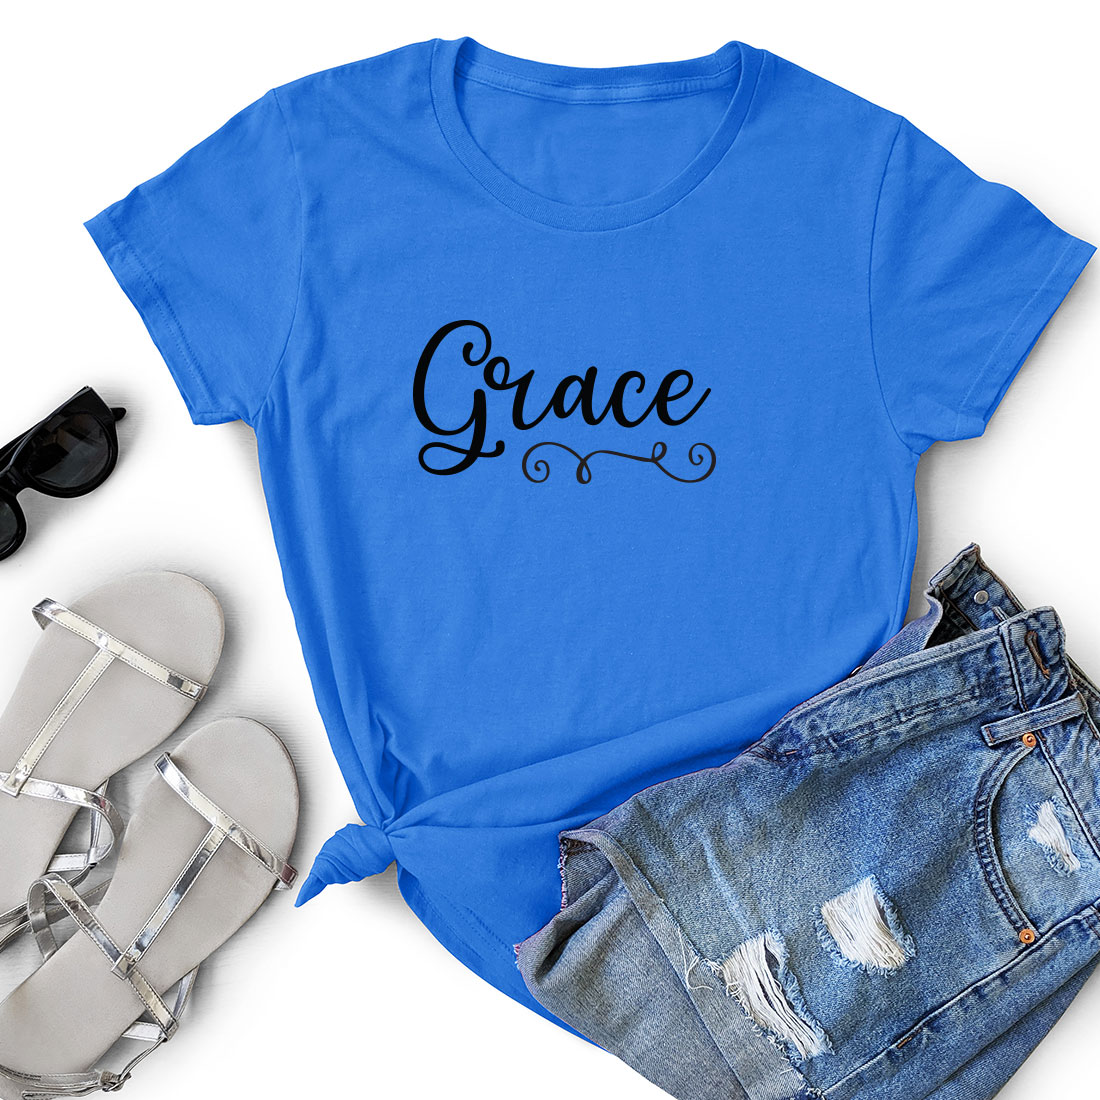 T - shirt that says grace next to a pair of shorts.